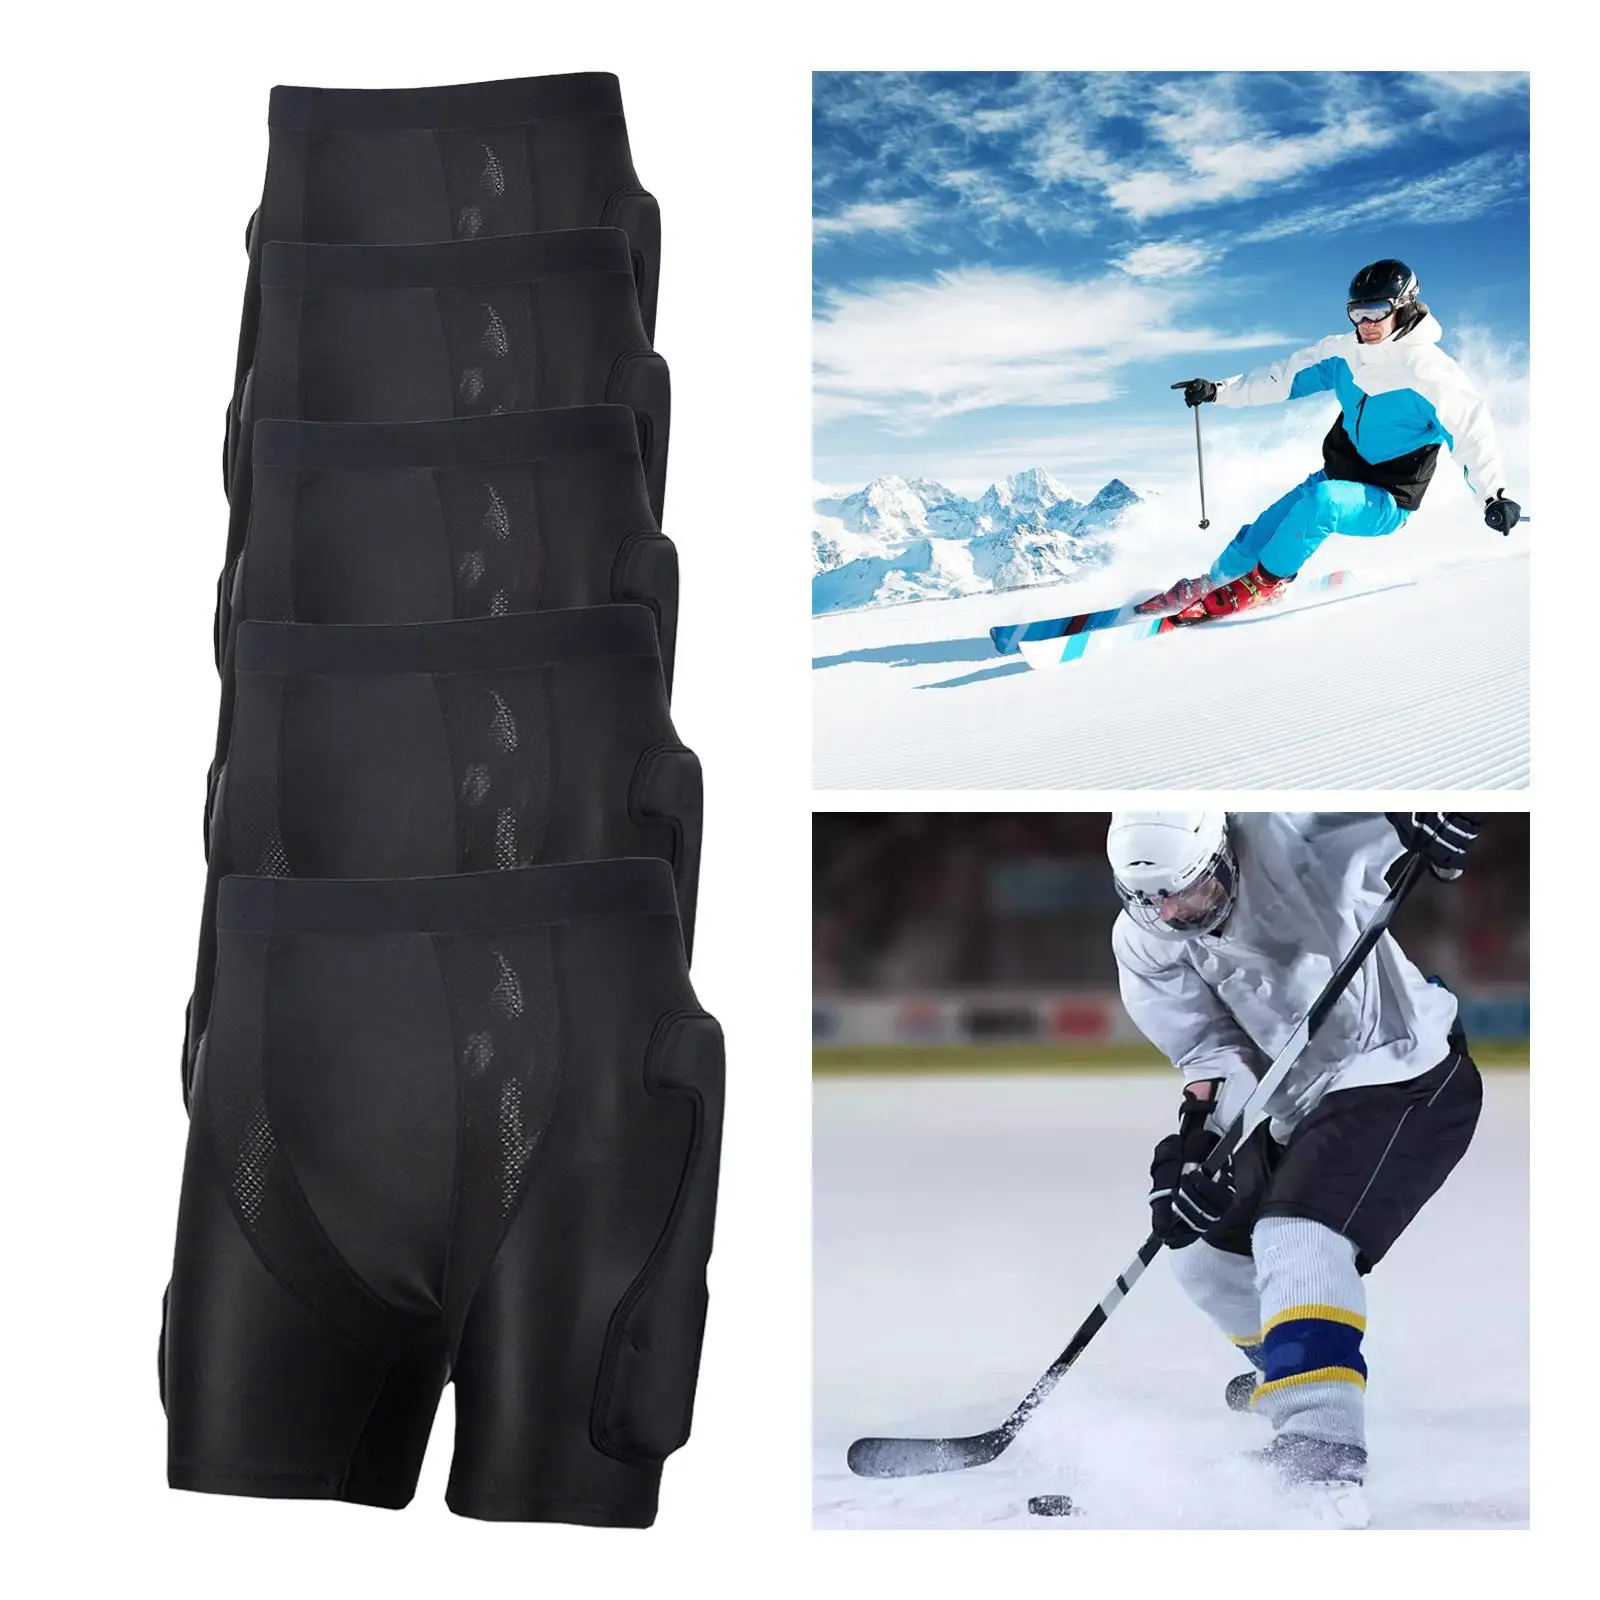 Padded Shorts Skid Hip Pad Multifunction Impact Resistance Protector for Roller Skating Outdoor Sports Skiing Snowboard Black